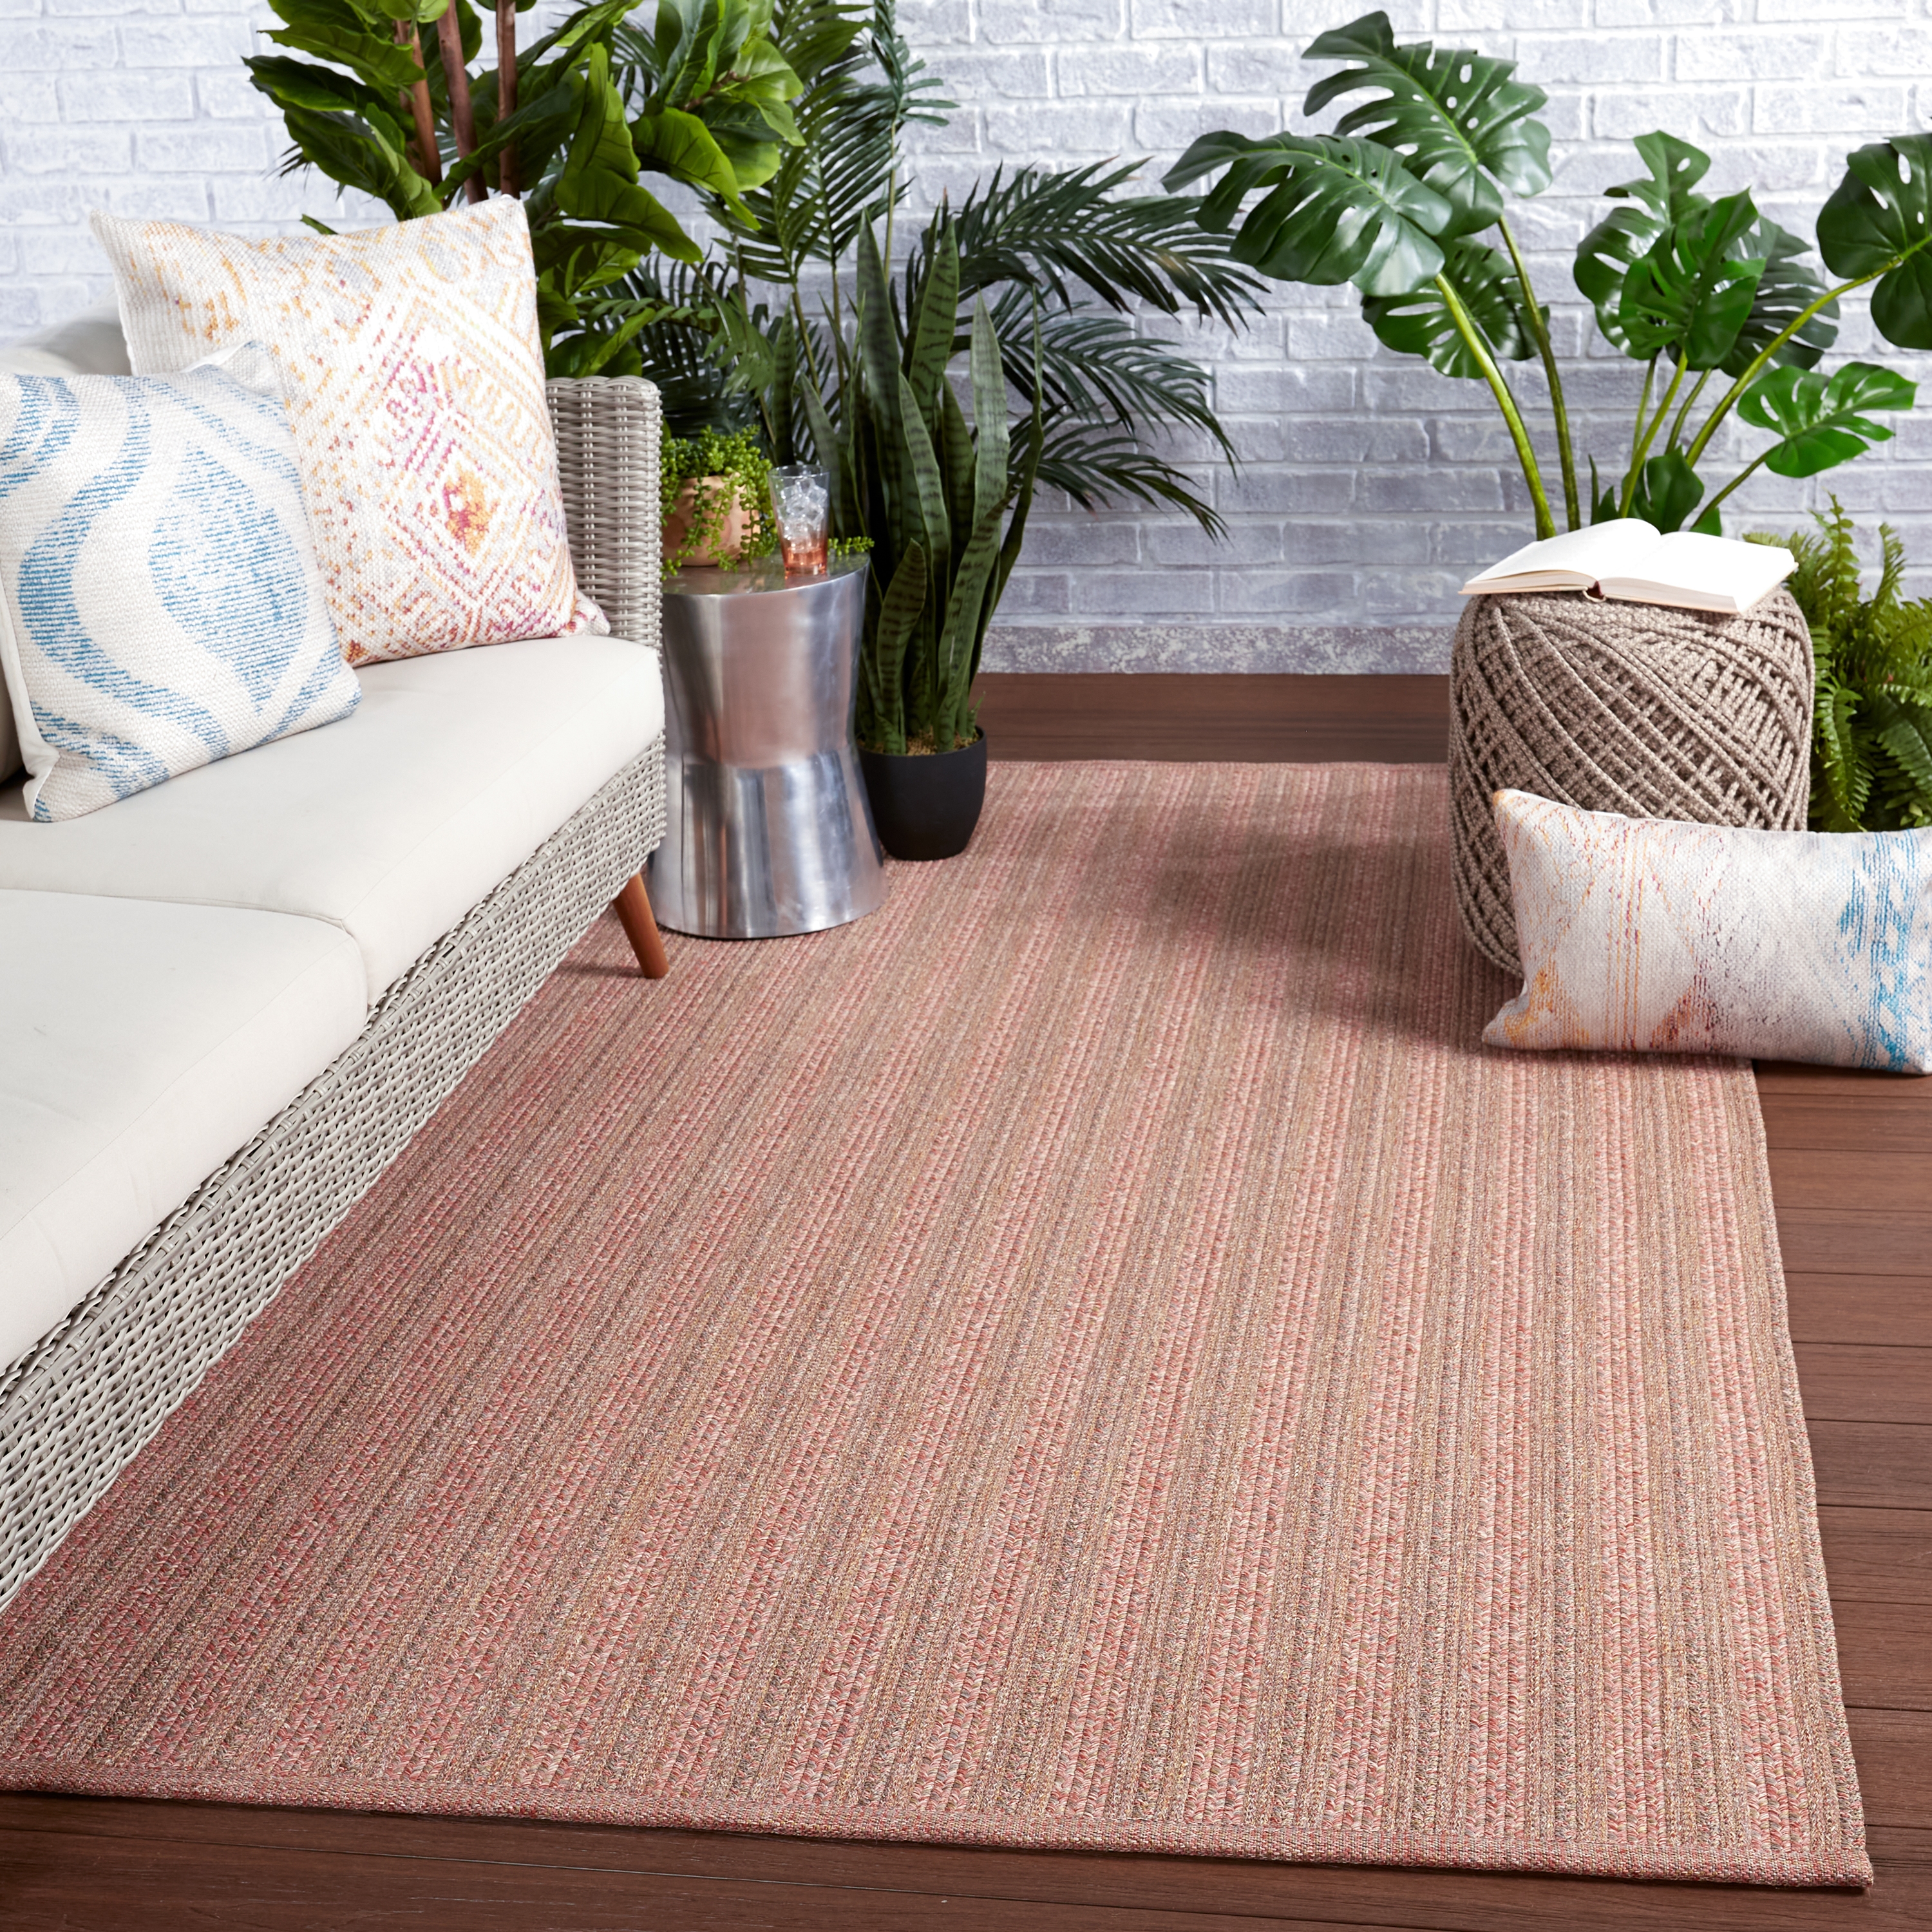 Topsail Indoor/ Outdoor Striped Rose/ Taupe Area Rug (4'X6') - Image 4